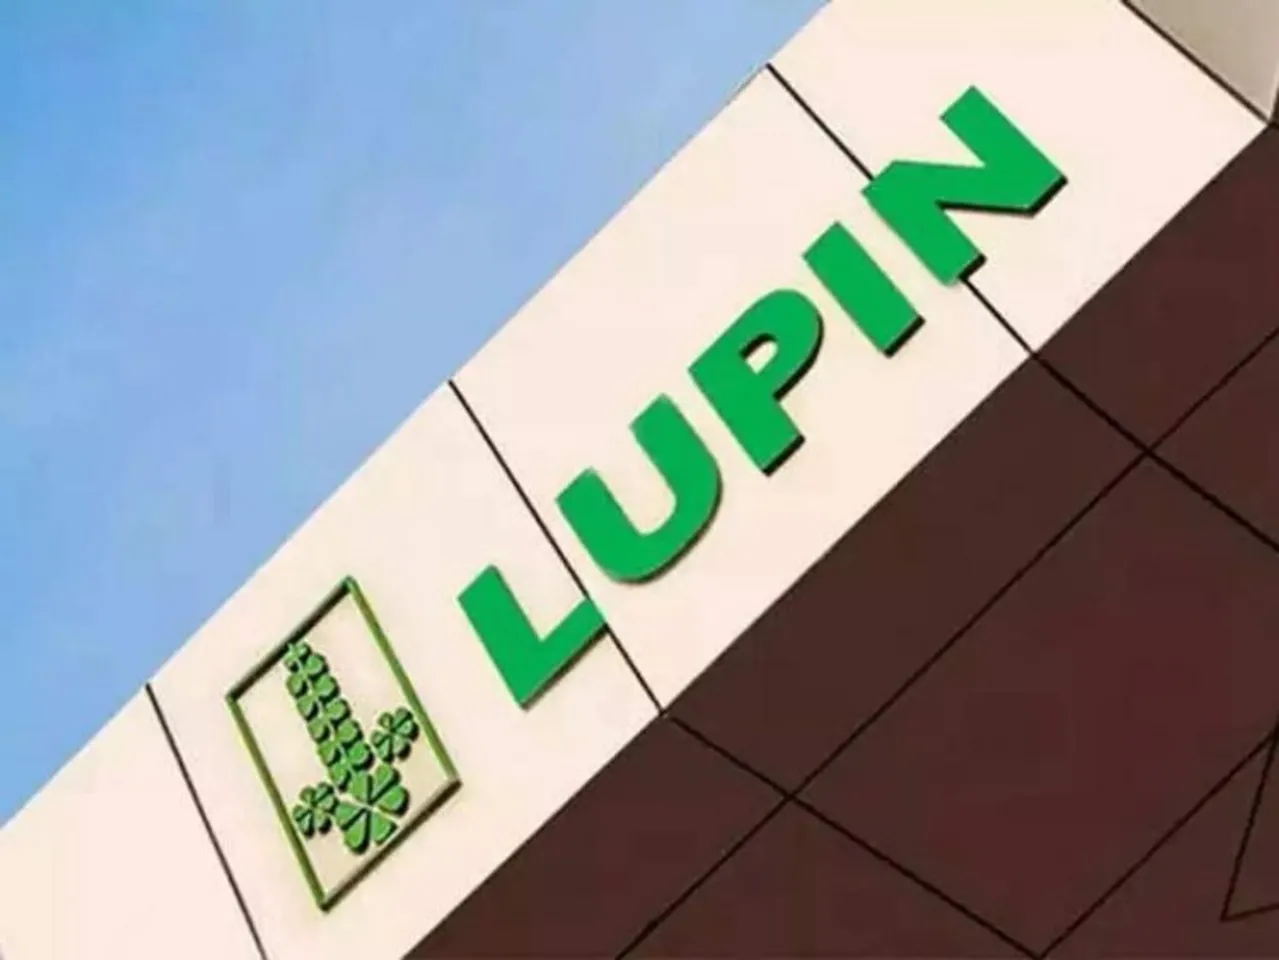 Lupin inks pact to acquire two inhalation brands from Sunovion for USD 75 mn